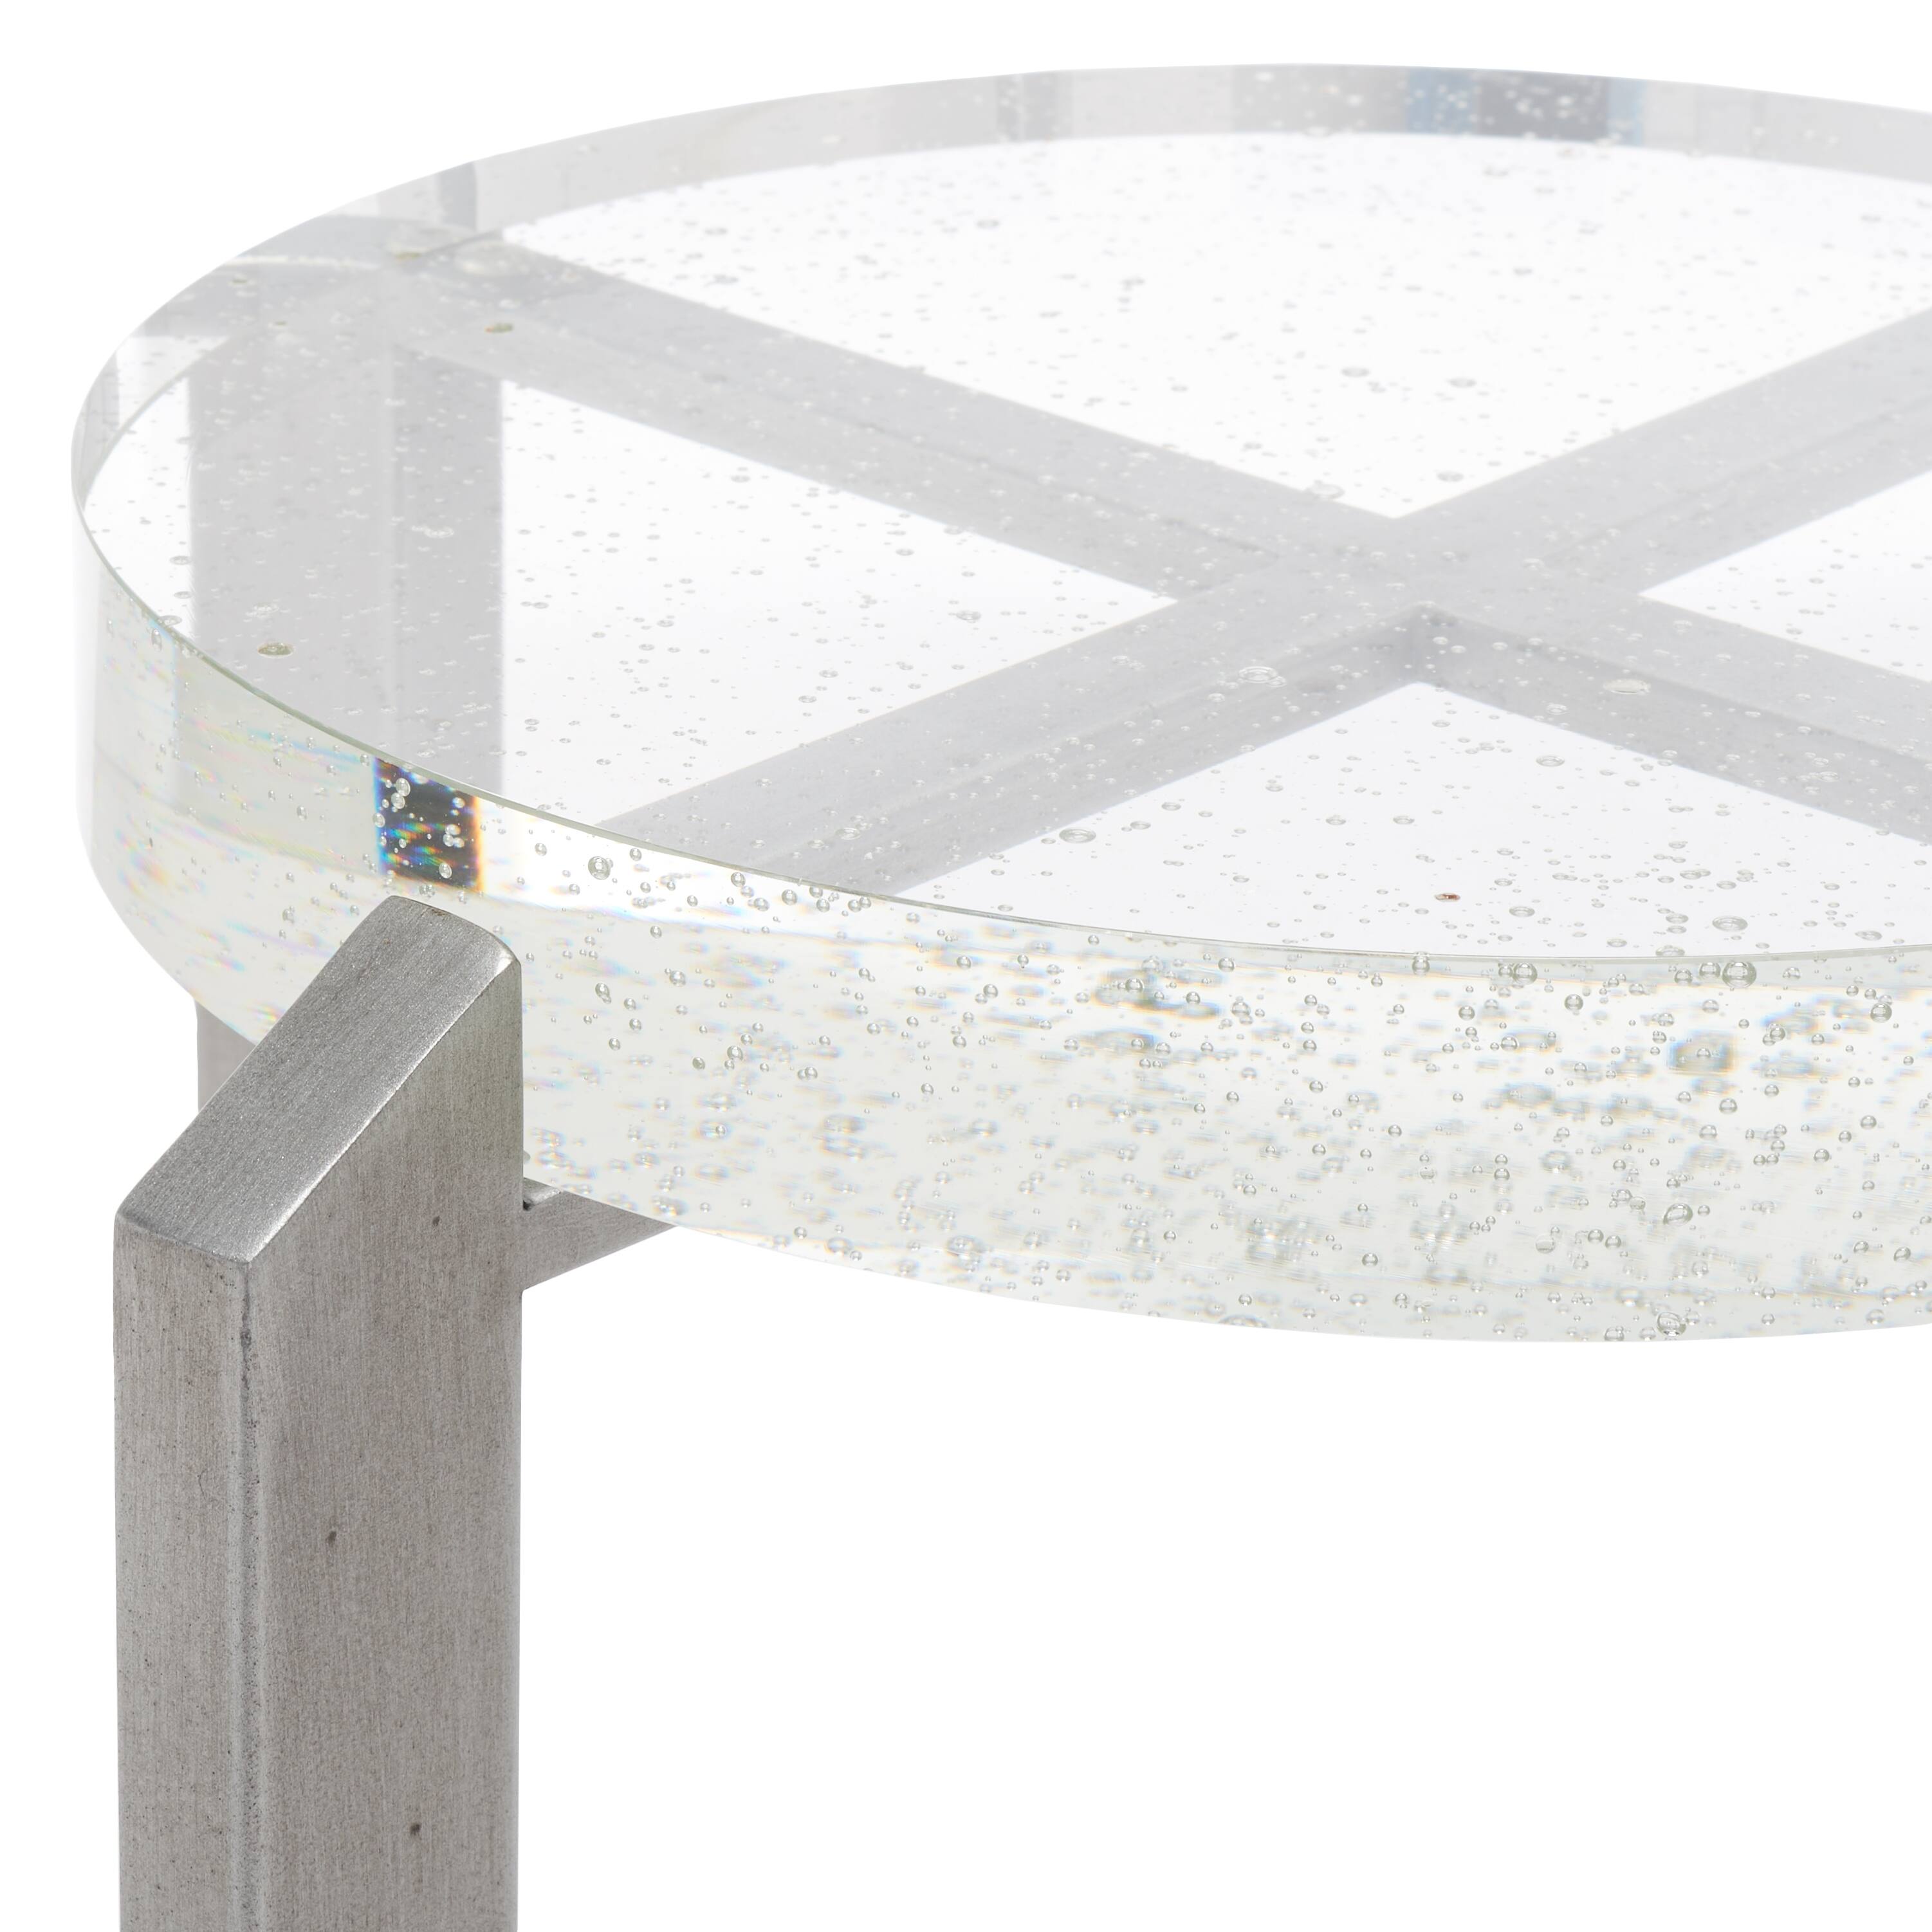 SAFAVIEH Couture Pixie Round Bubble Glass Accent Table - 15 IN W x 15 IN D x 21 IN H